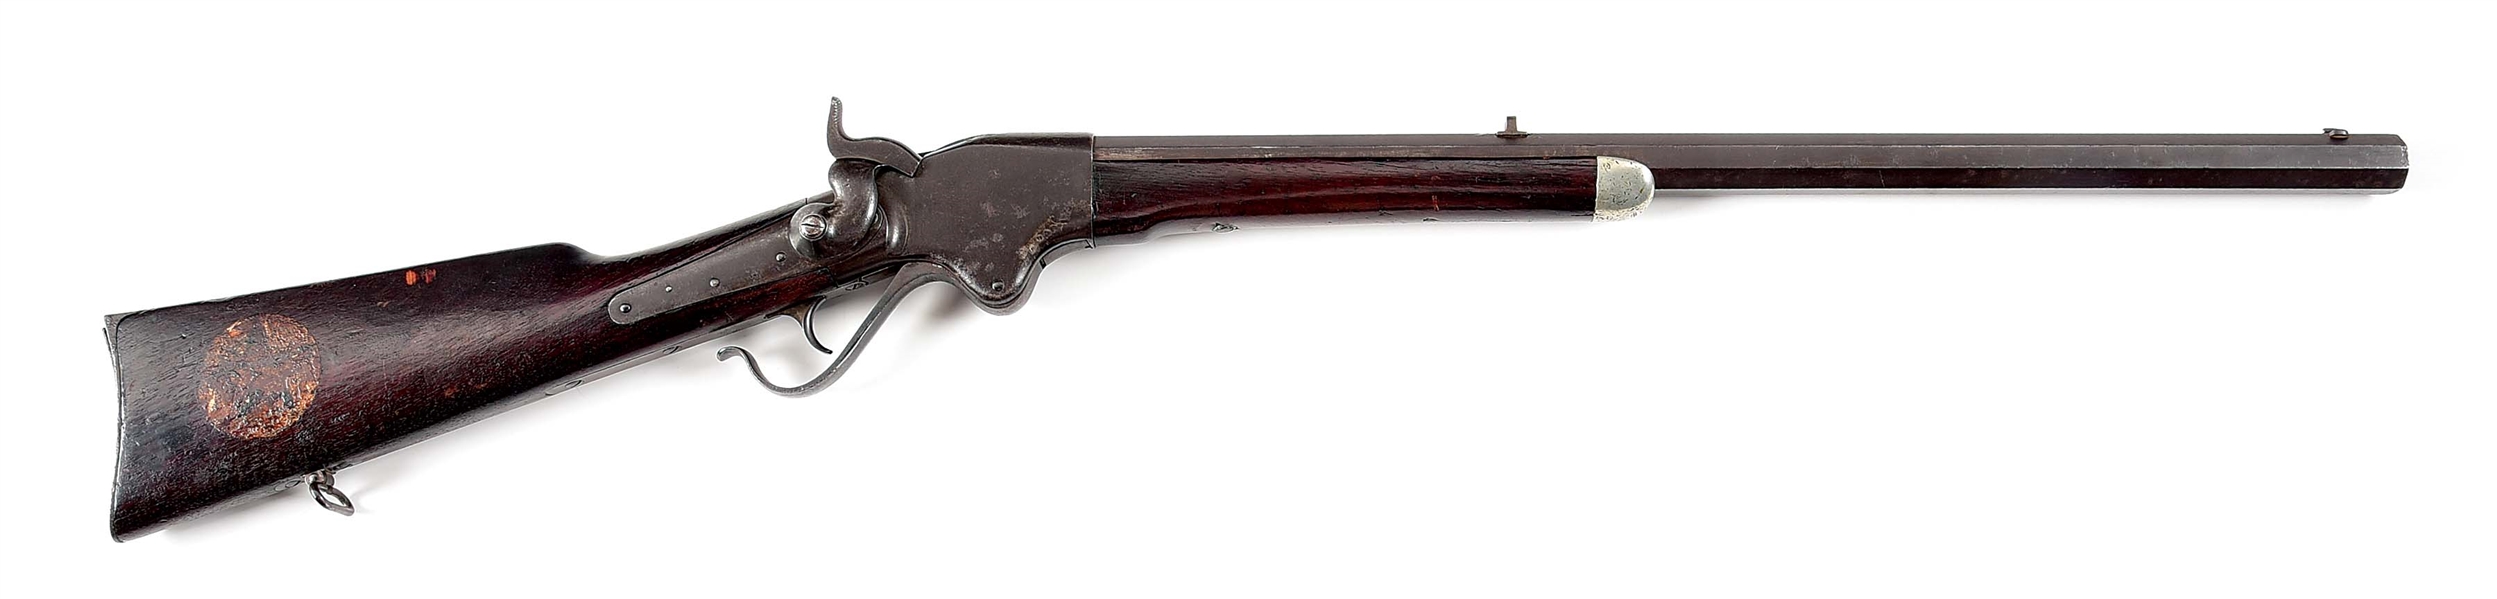 (A) H. SCHLEGELMILCH CONVERTED SPENCER BUFFALO RIFLE.